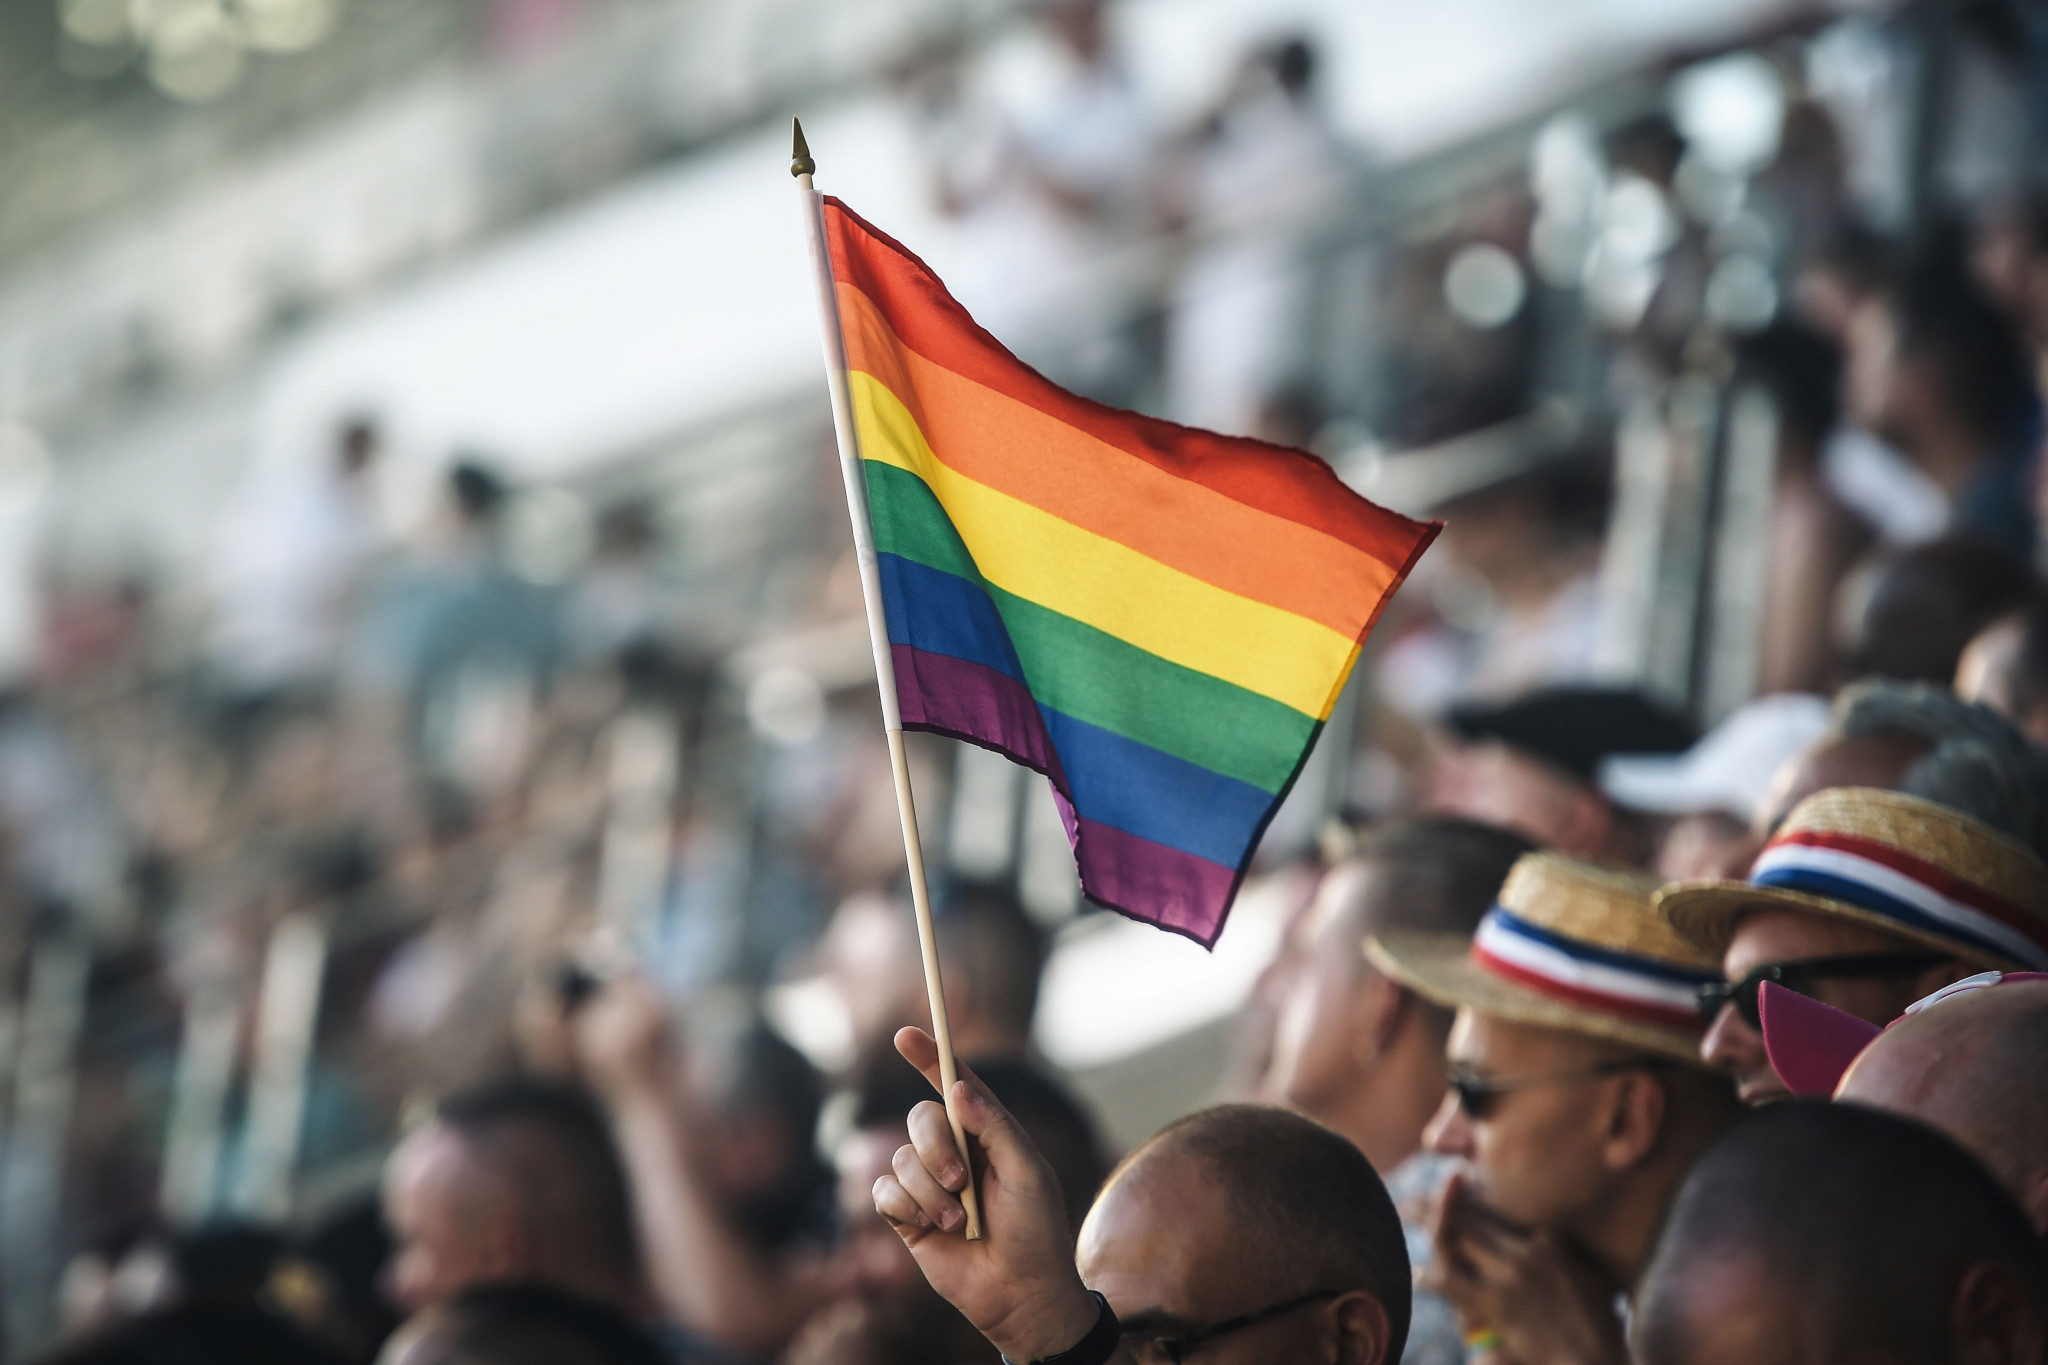 RFI Asia are set to oversee all aspects of communication for the 11th Gay Games ©Getty Images